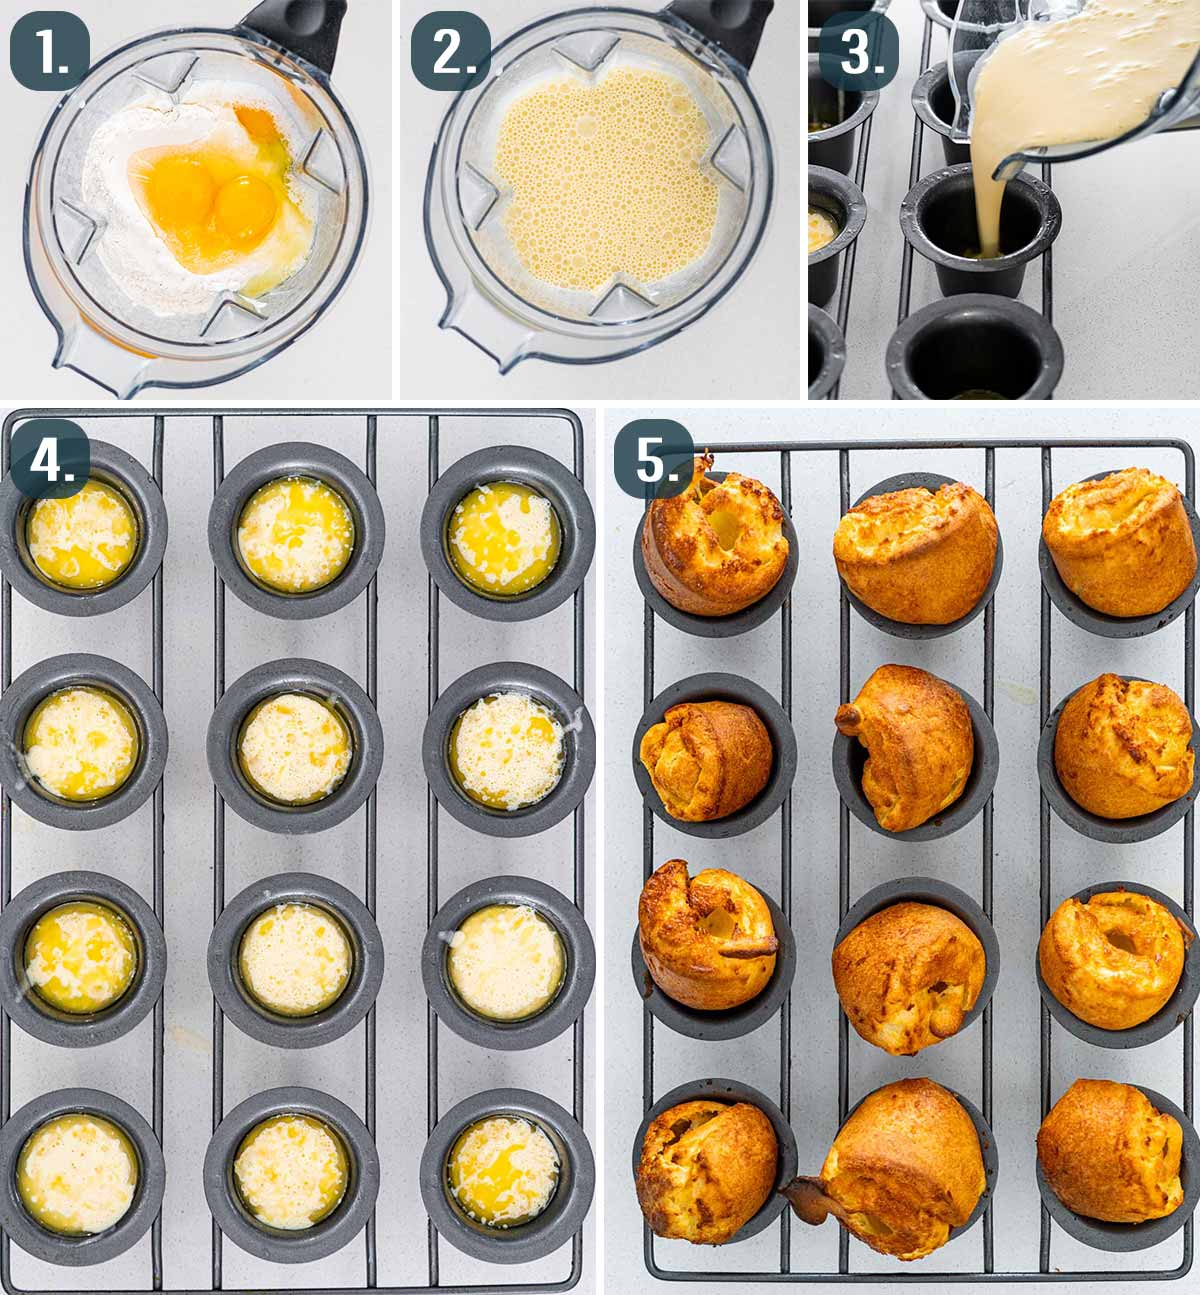 detailed process shots, showing how to make popovers.